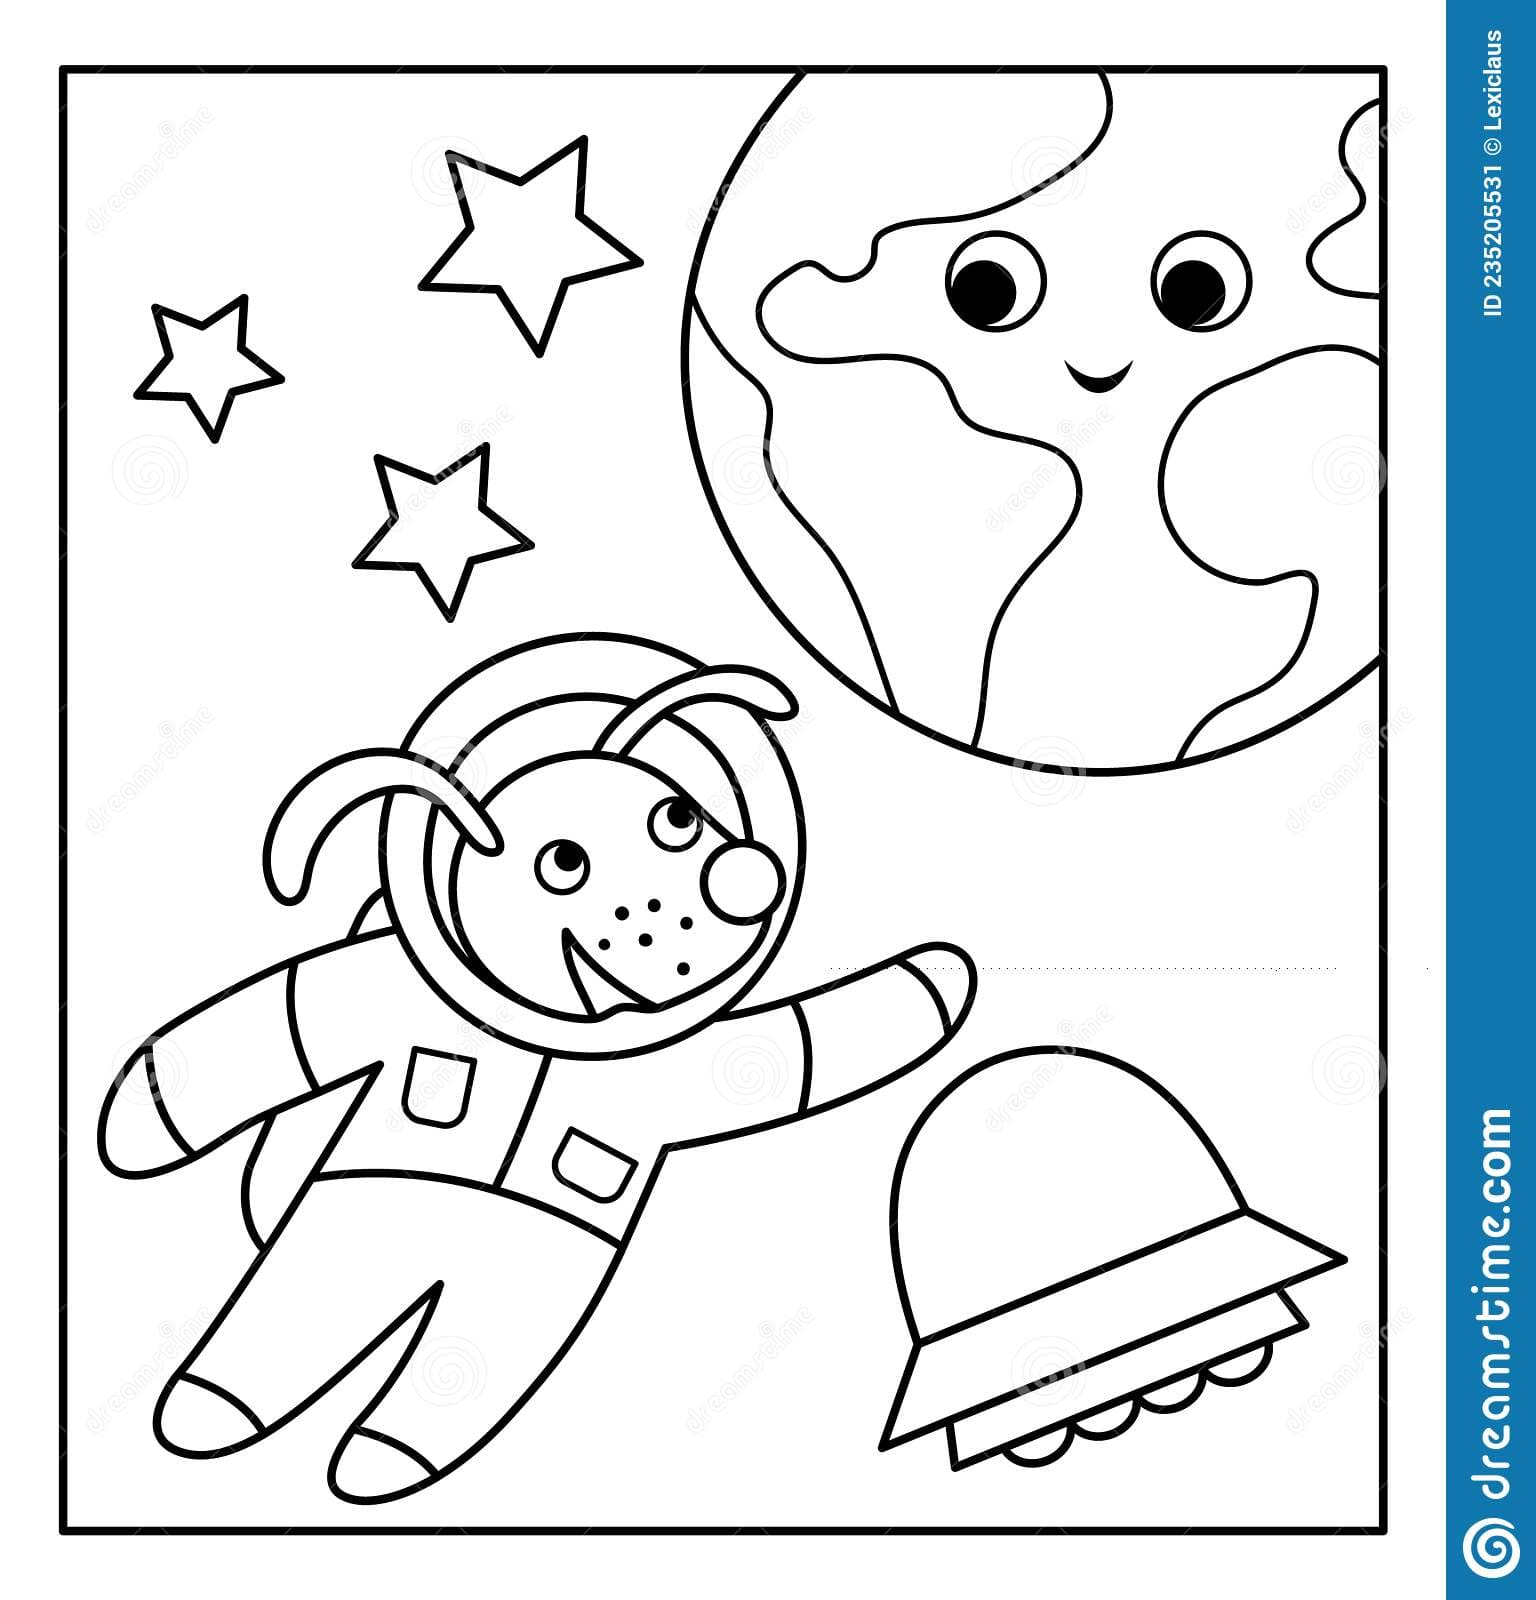 Vector black and white funny astronaut dog in space with planet Earth, stars, UFO